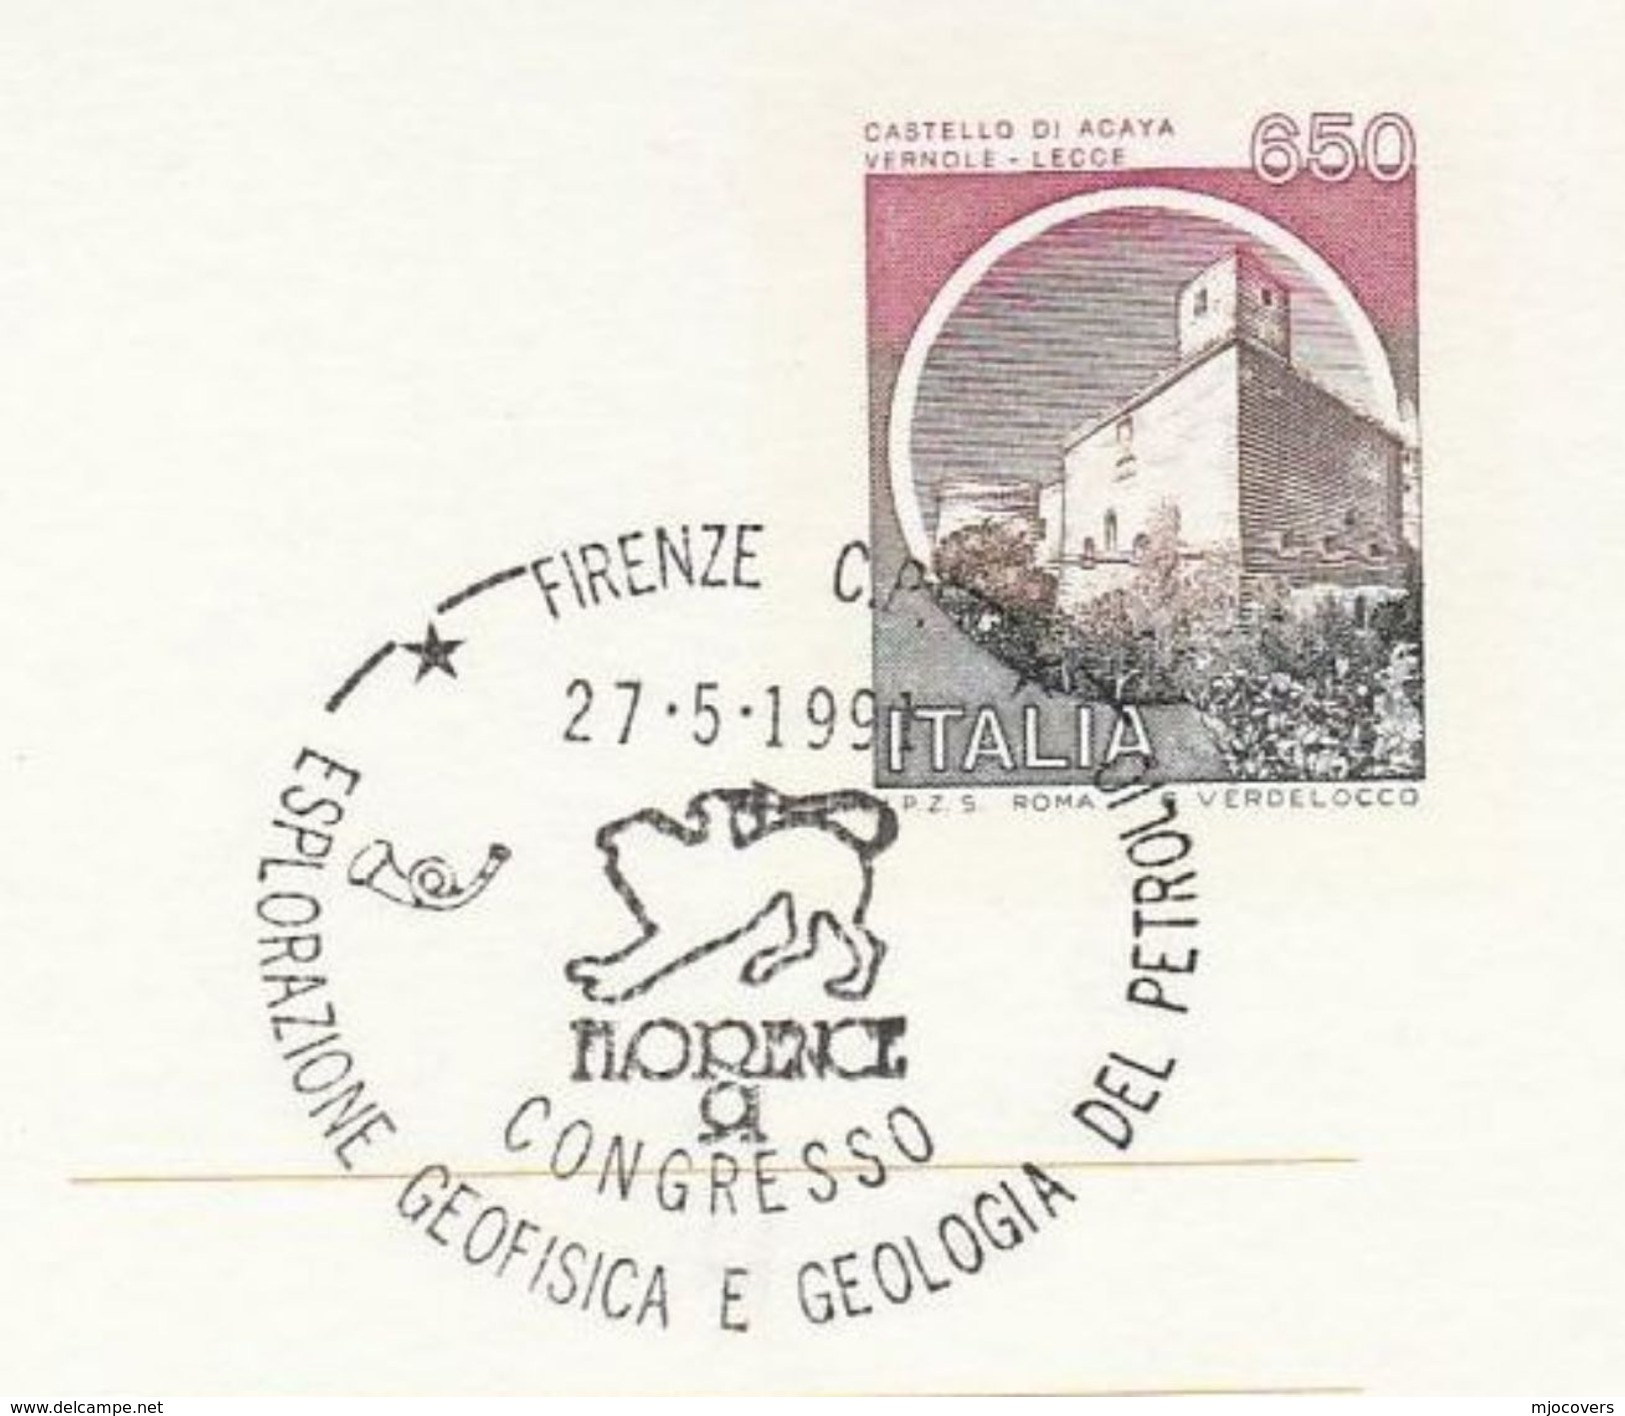 1991 Firenze OIL EXPLORATION GEOPHYSICS CONGRESS Event COVER Italy Geology Stationery Stamp Petroleum Minerals Energy - Pétrole